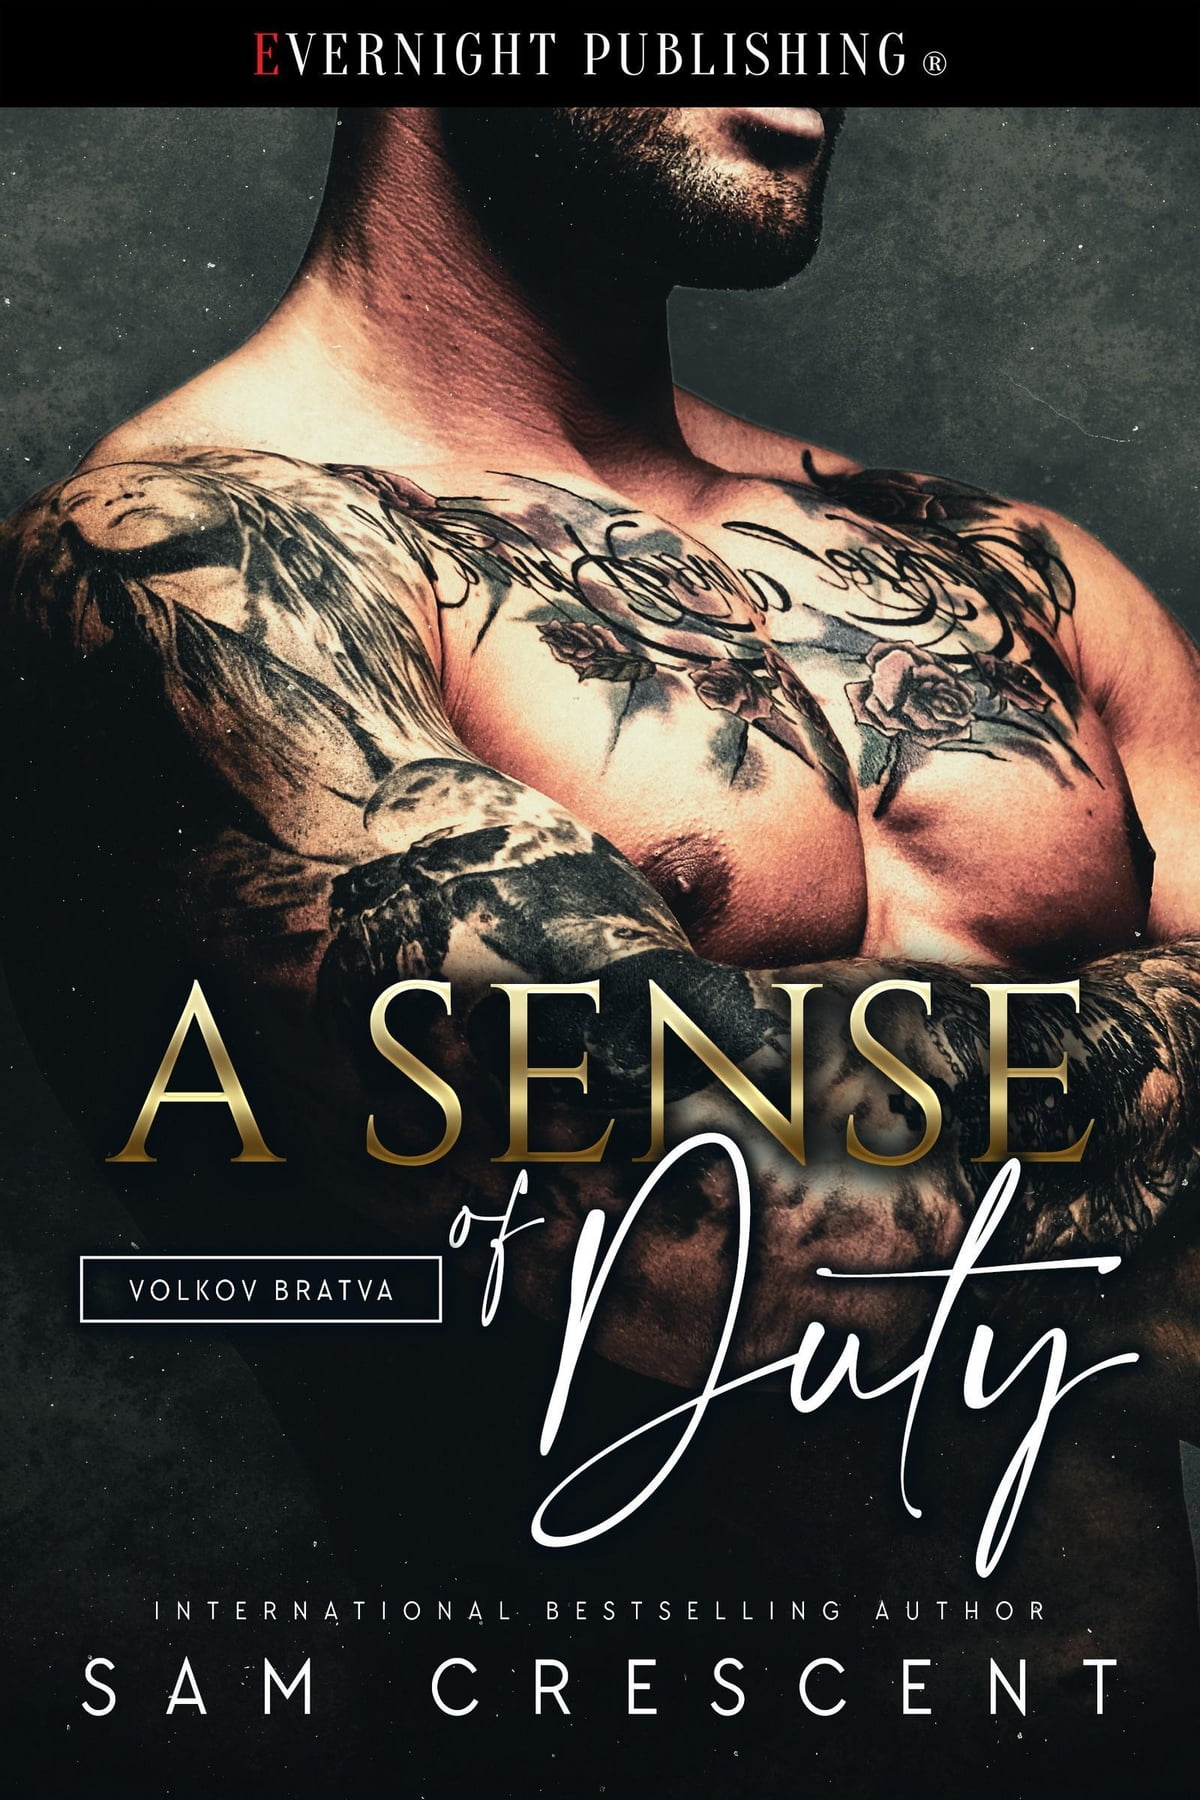 A Sense of Duty by Sam Crescent is a stimulating and mind-changing novel that can be your all-day companion. This novel does;